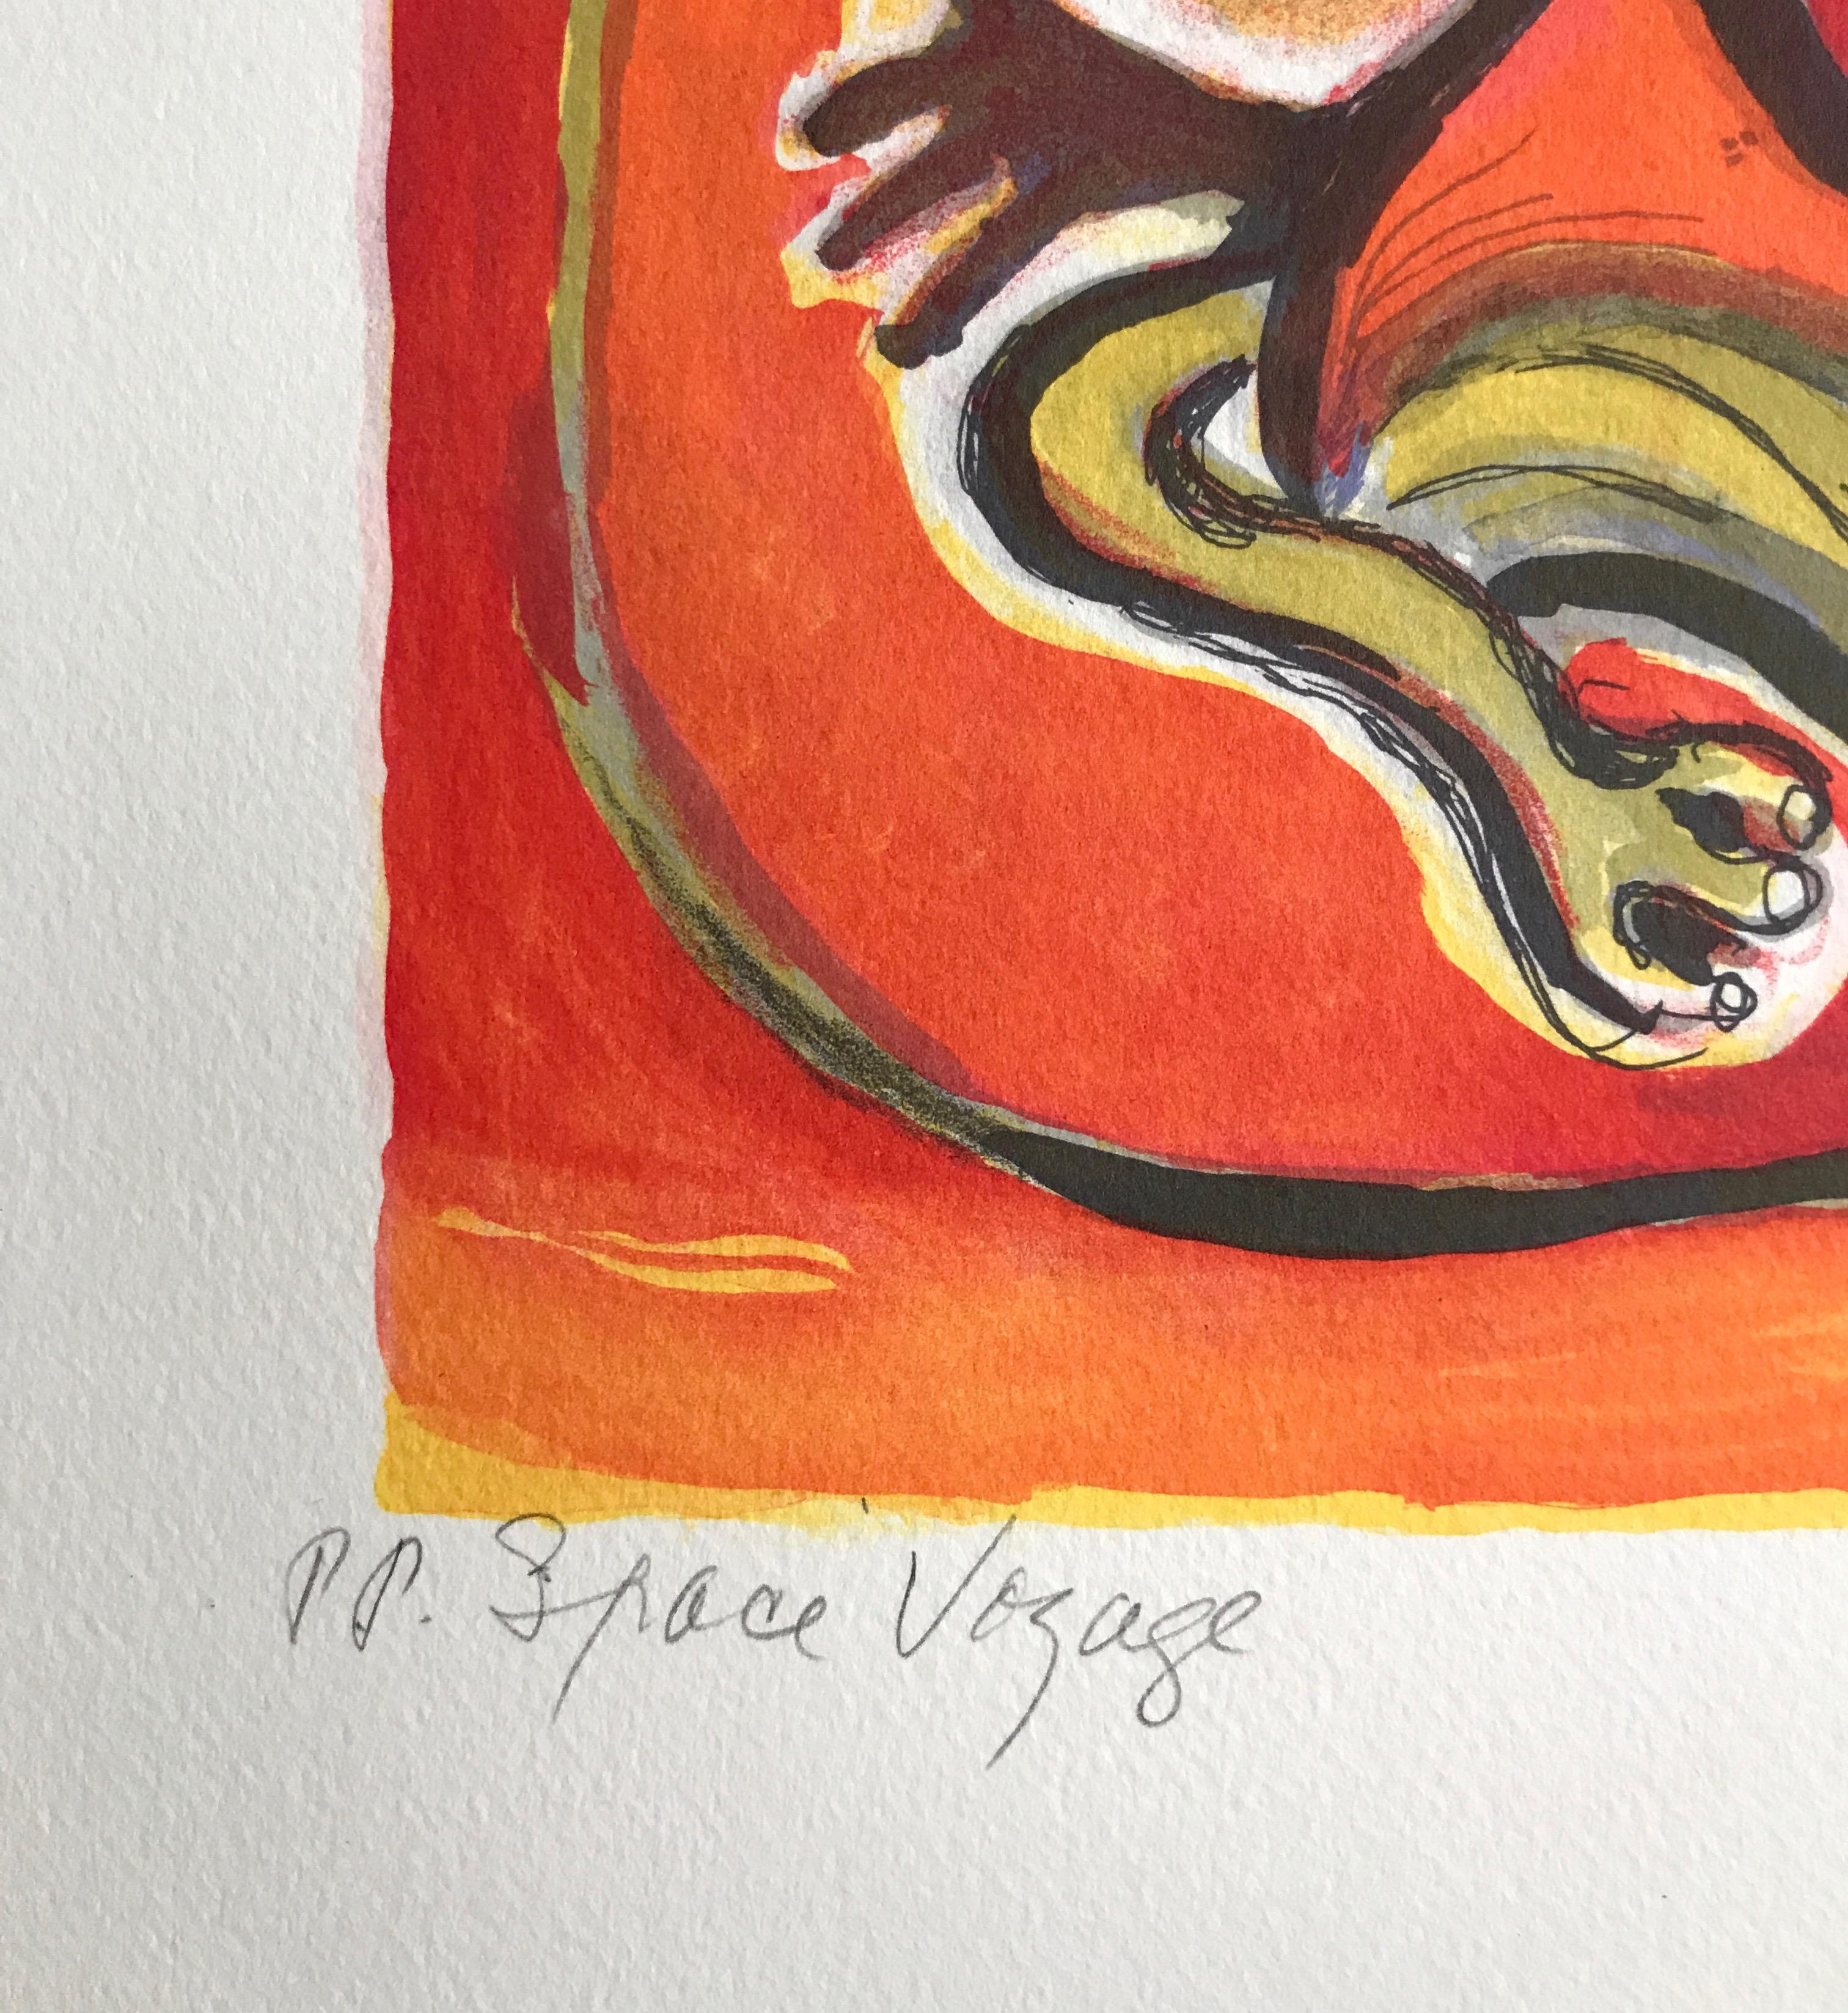 SPACE VOYAGE Signed Lithograph, Outer Space Creatures, Latin American Artist - Print by Raquel Forner